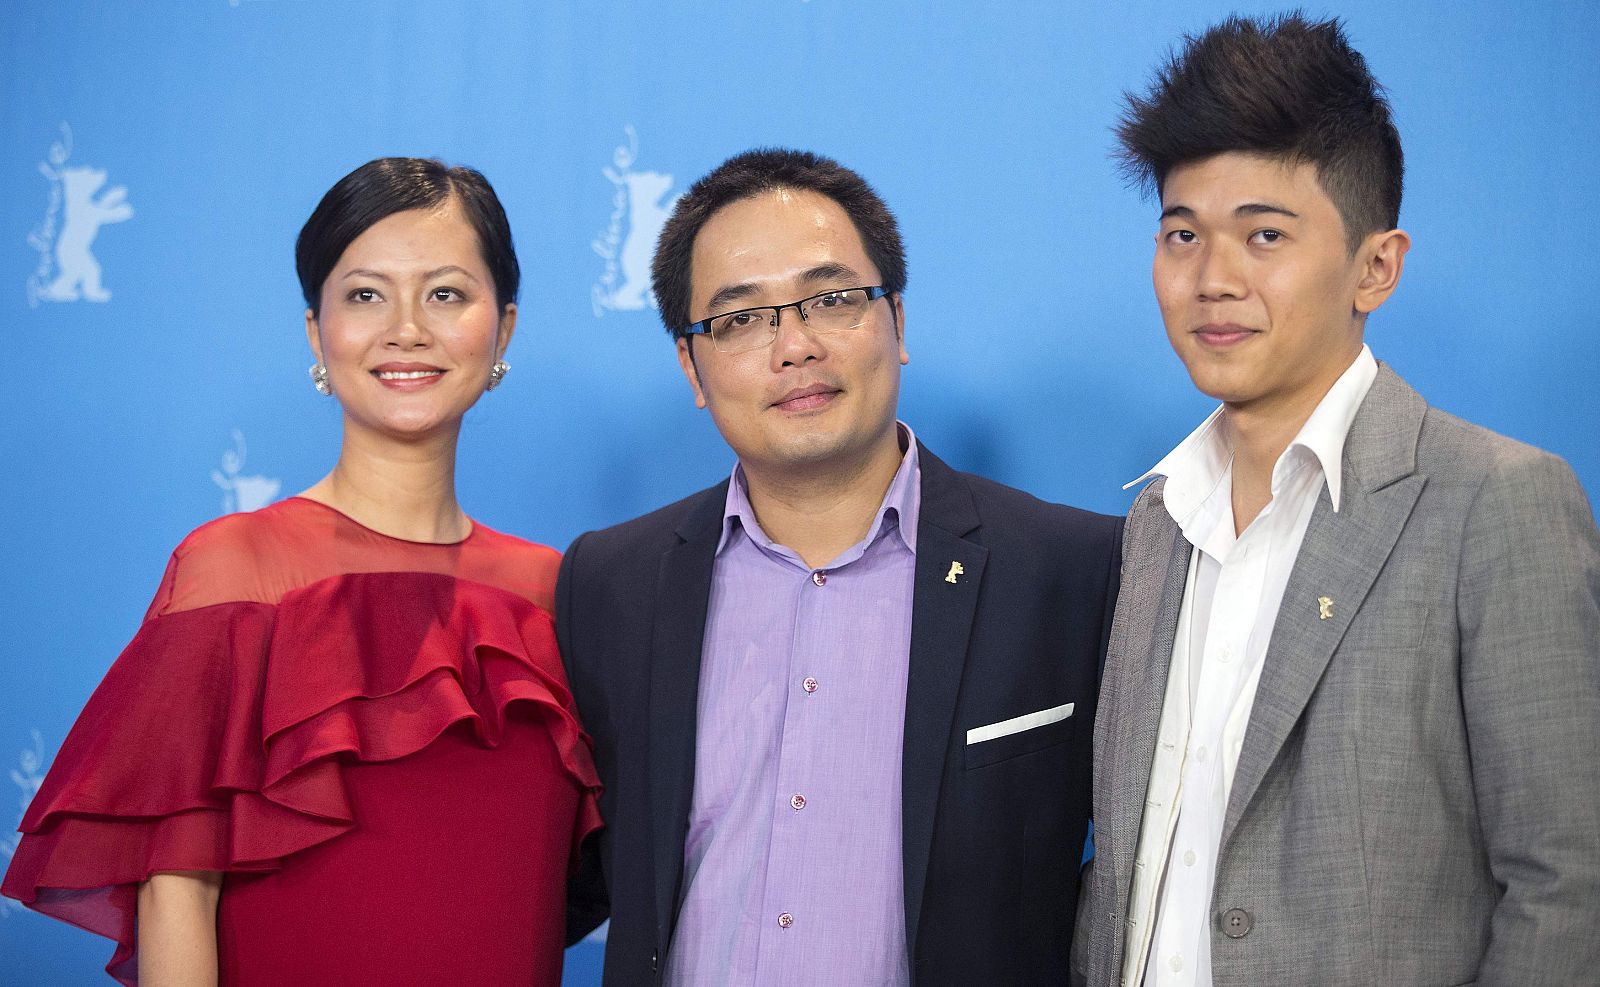 Actress  Yen, director Di and actor Hoang attend the 'Cha va con va' ('Big Father, Small Father and Other Stories') photocall at competition section at the 65th Berlinale International Film Festival in Berlin